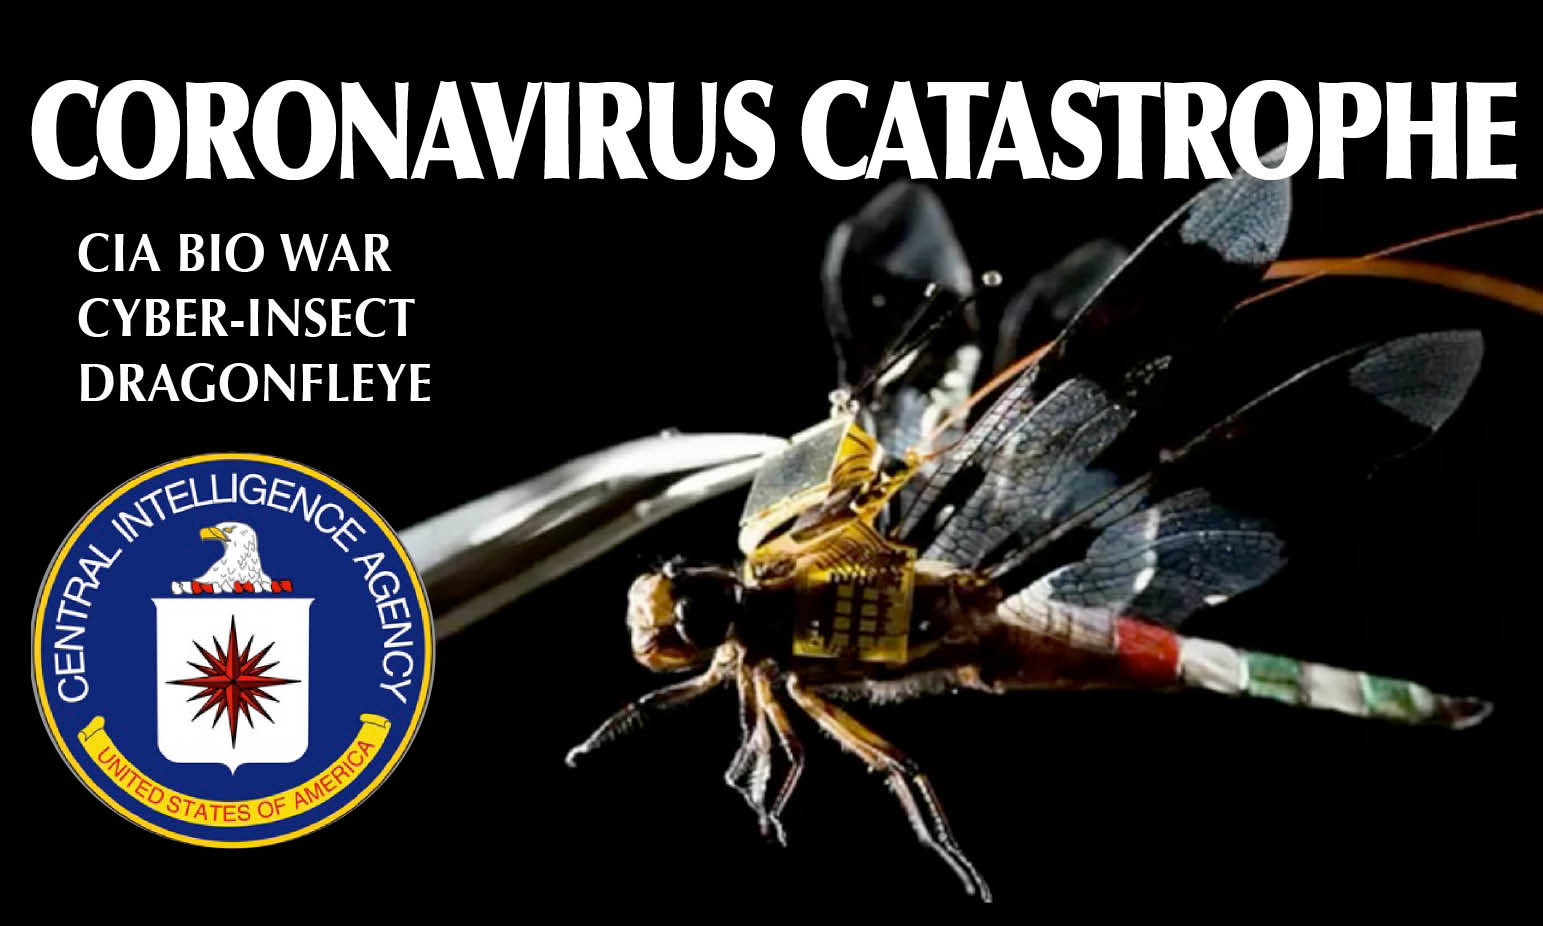 CoronaVirus BioWeapon – 2. Intel sources: «Spread by CIA with nano-Uav» as Cyber-DragonflEye. Alert in Iran and Italy